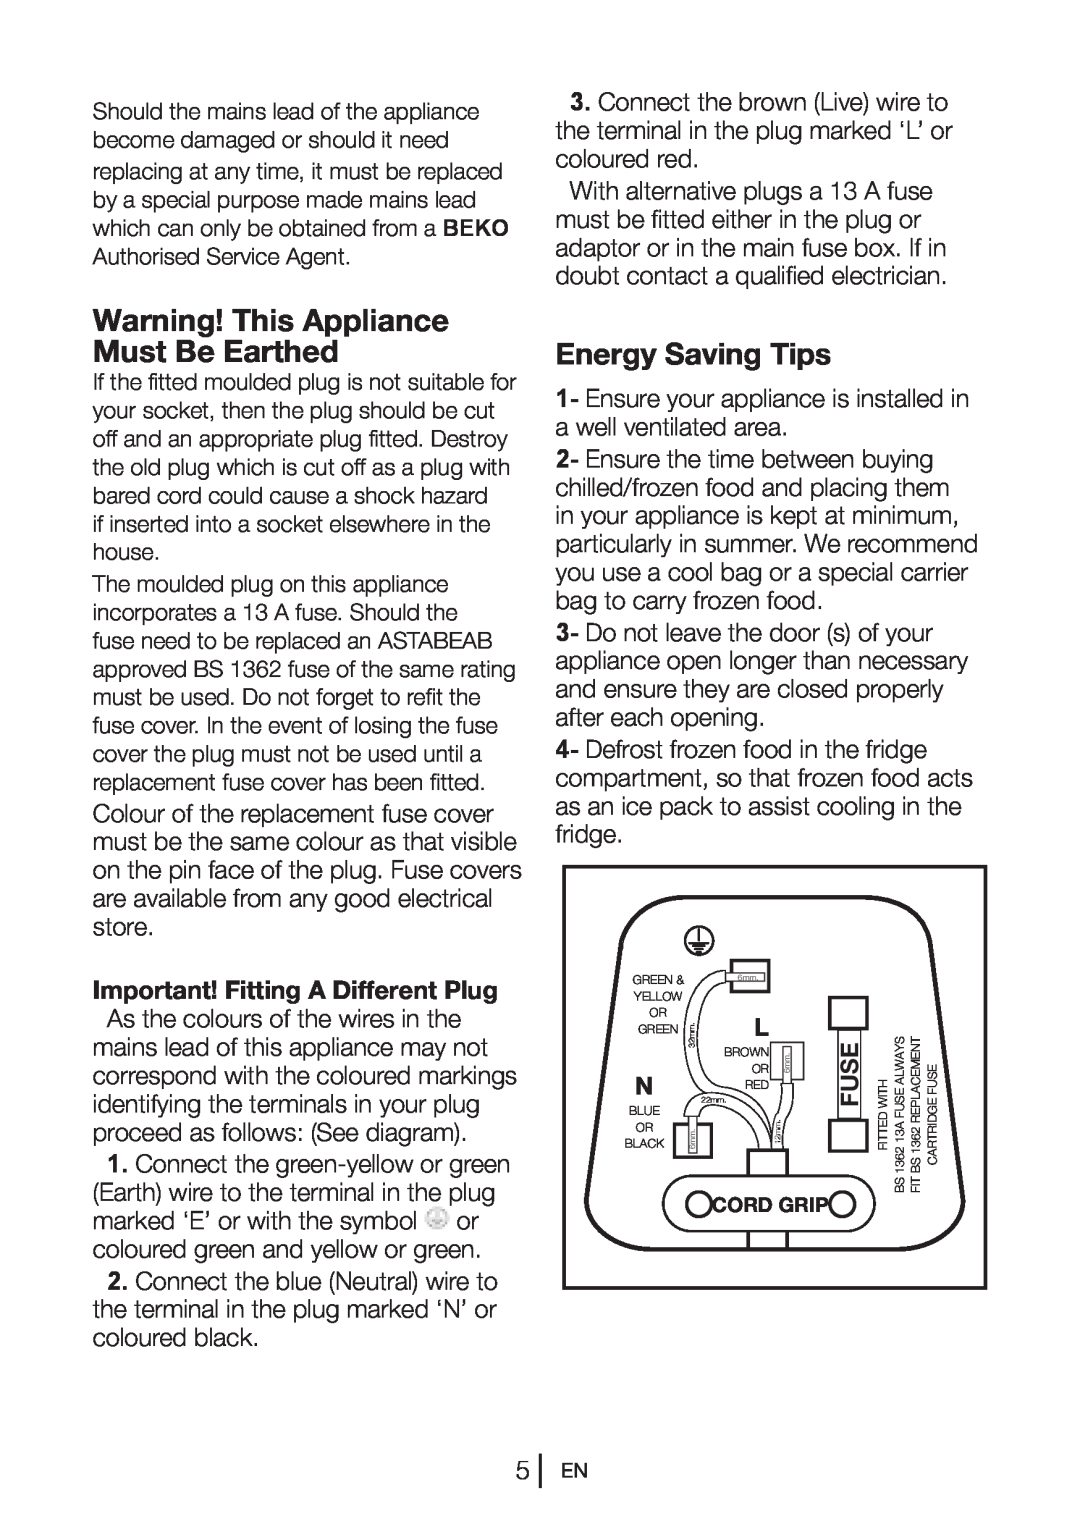 Beko UL483APW manual Warning! This Appliance Must Be Earthed, Energy Saving Tips, Important! Fitting A Different Plug, Fuse 